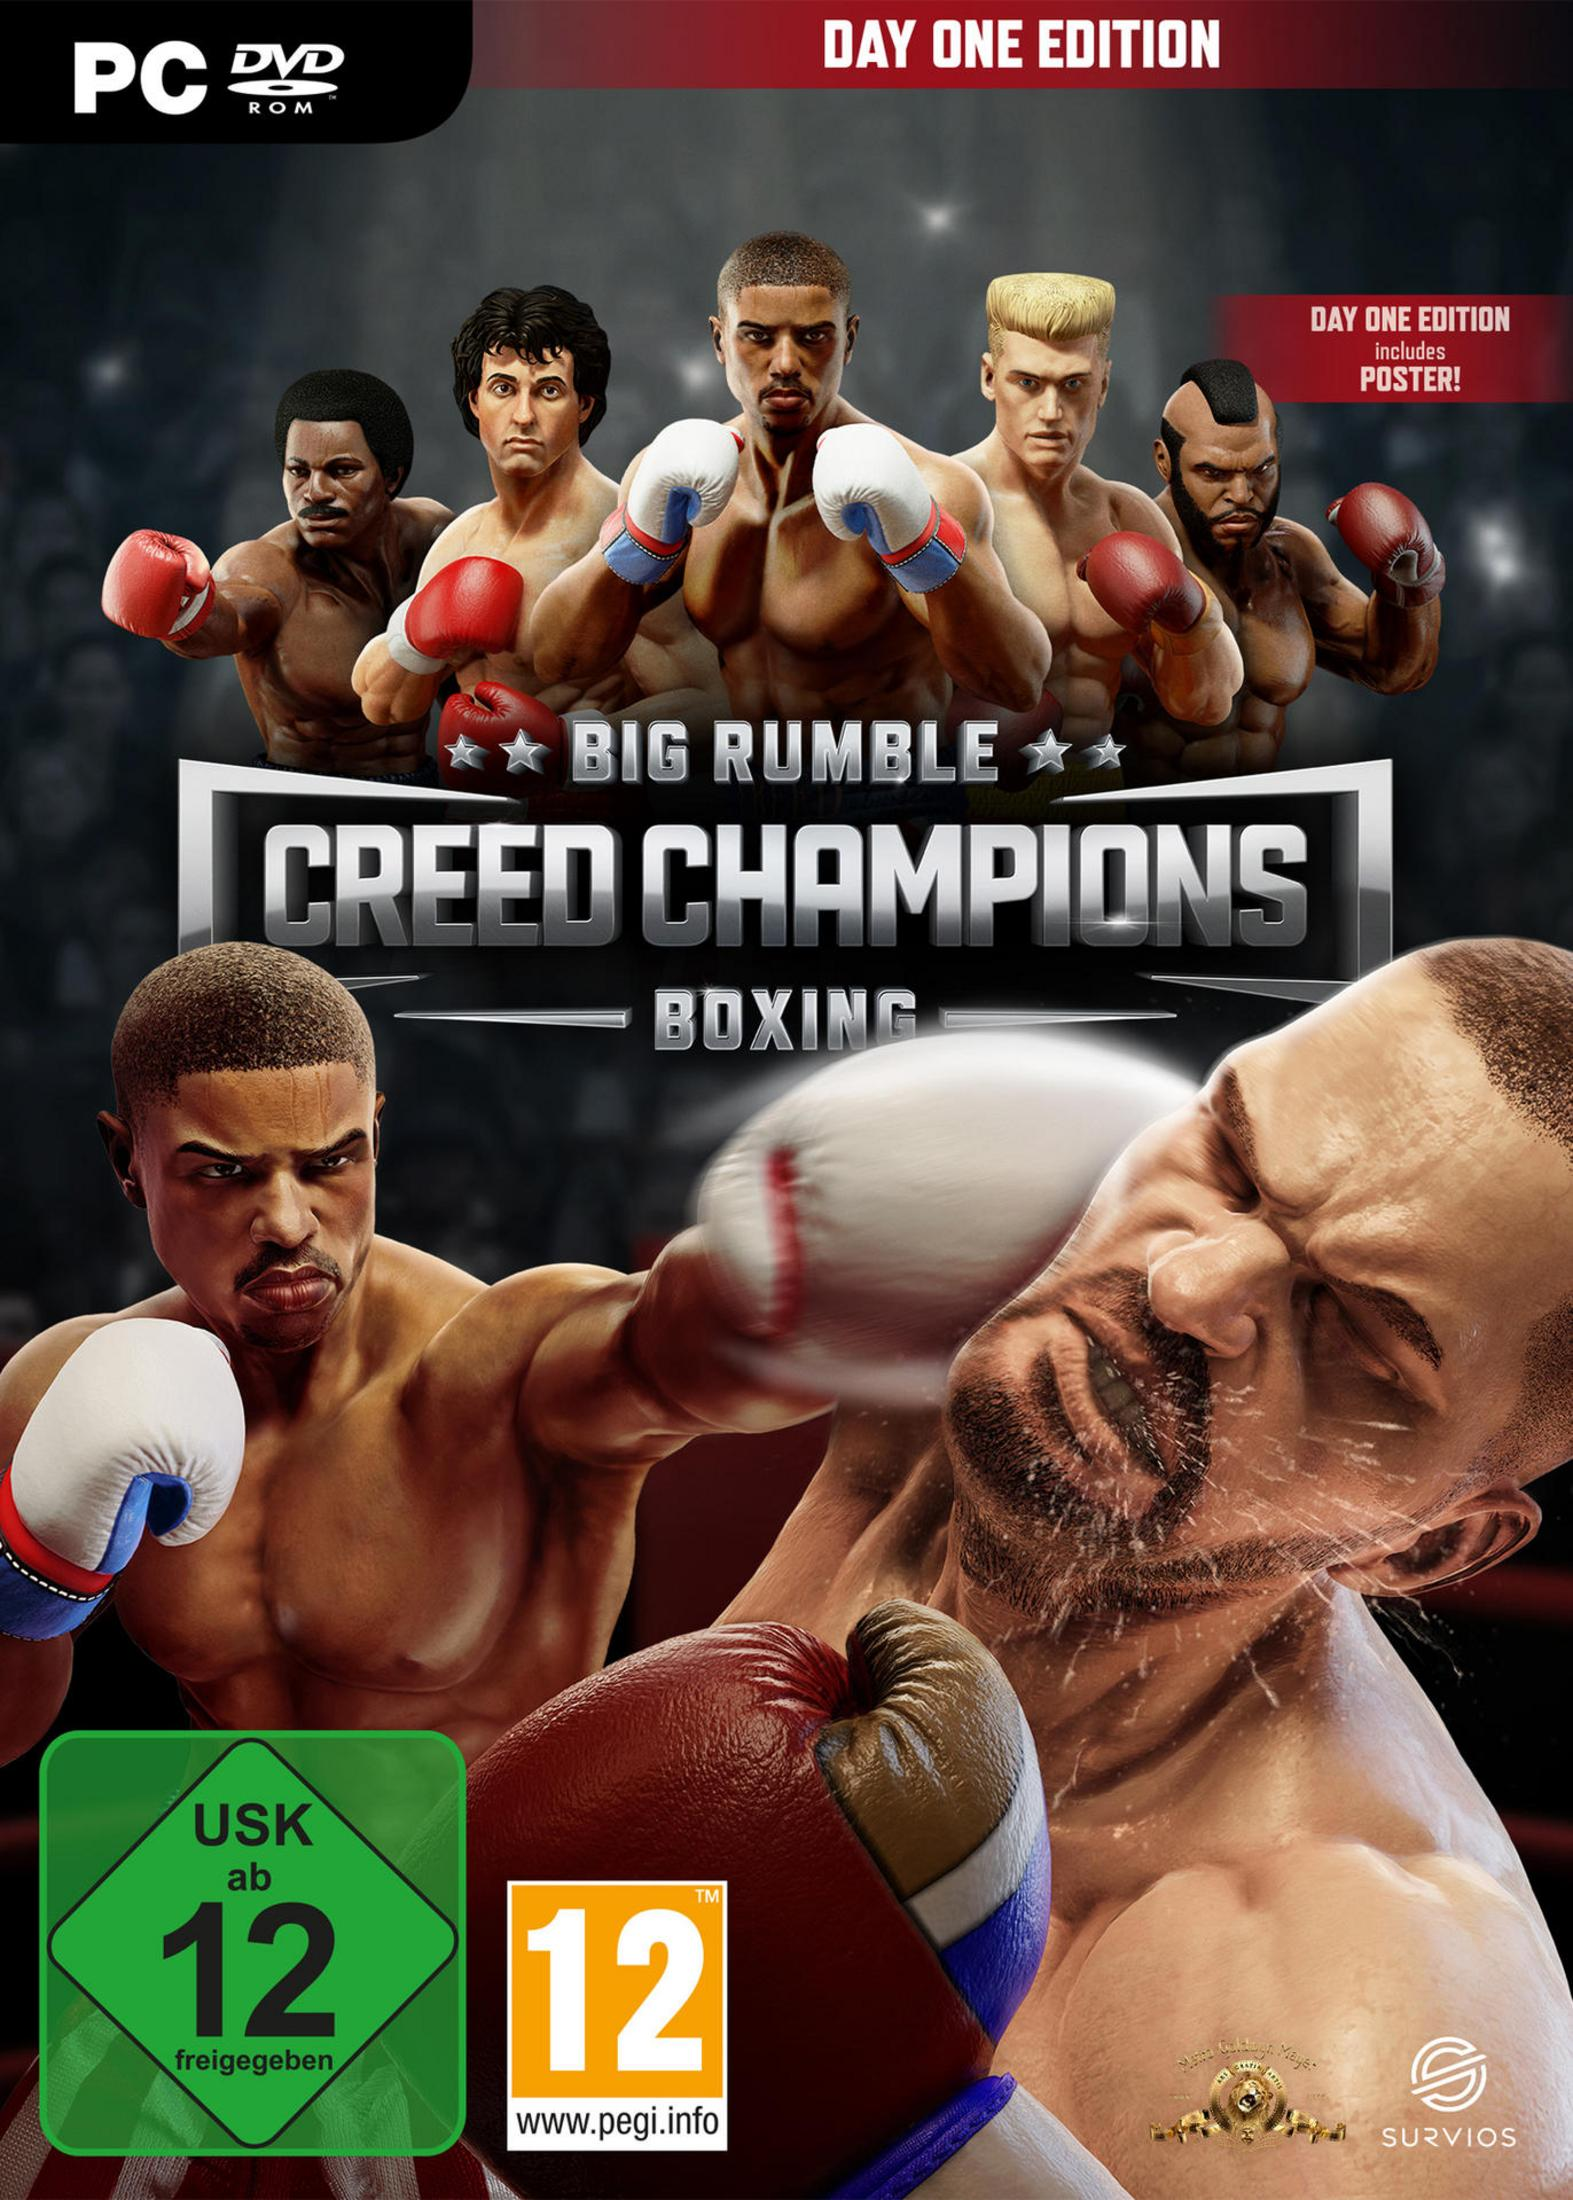 BIG RUMBLE BOXING-CREED ONE ED. [PC] CHAMPIONSDAY 